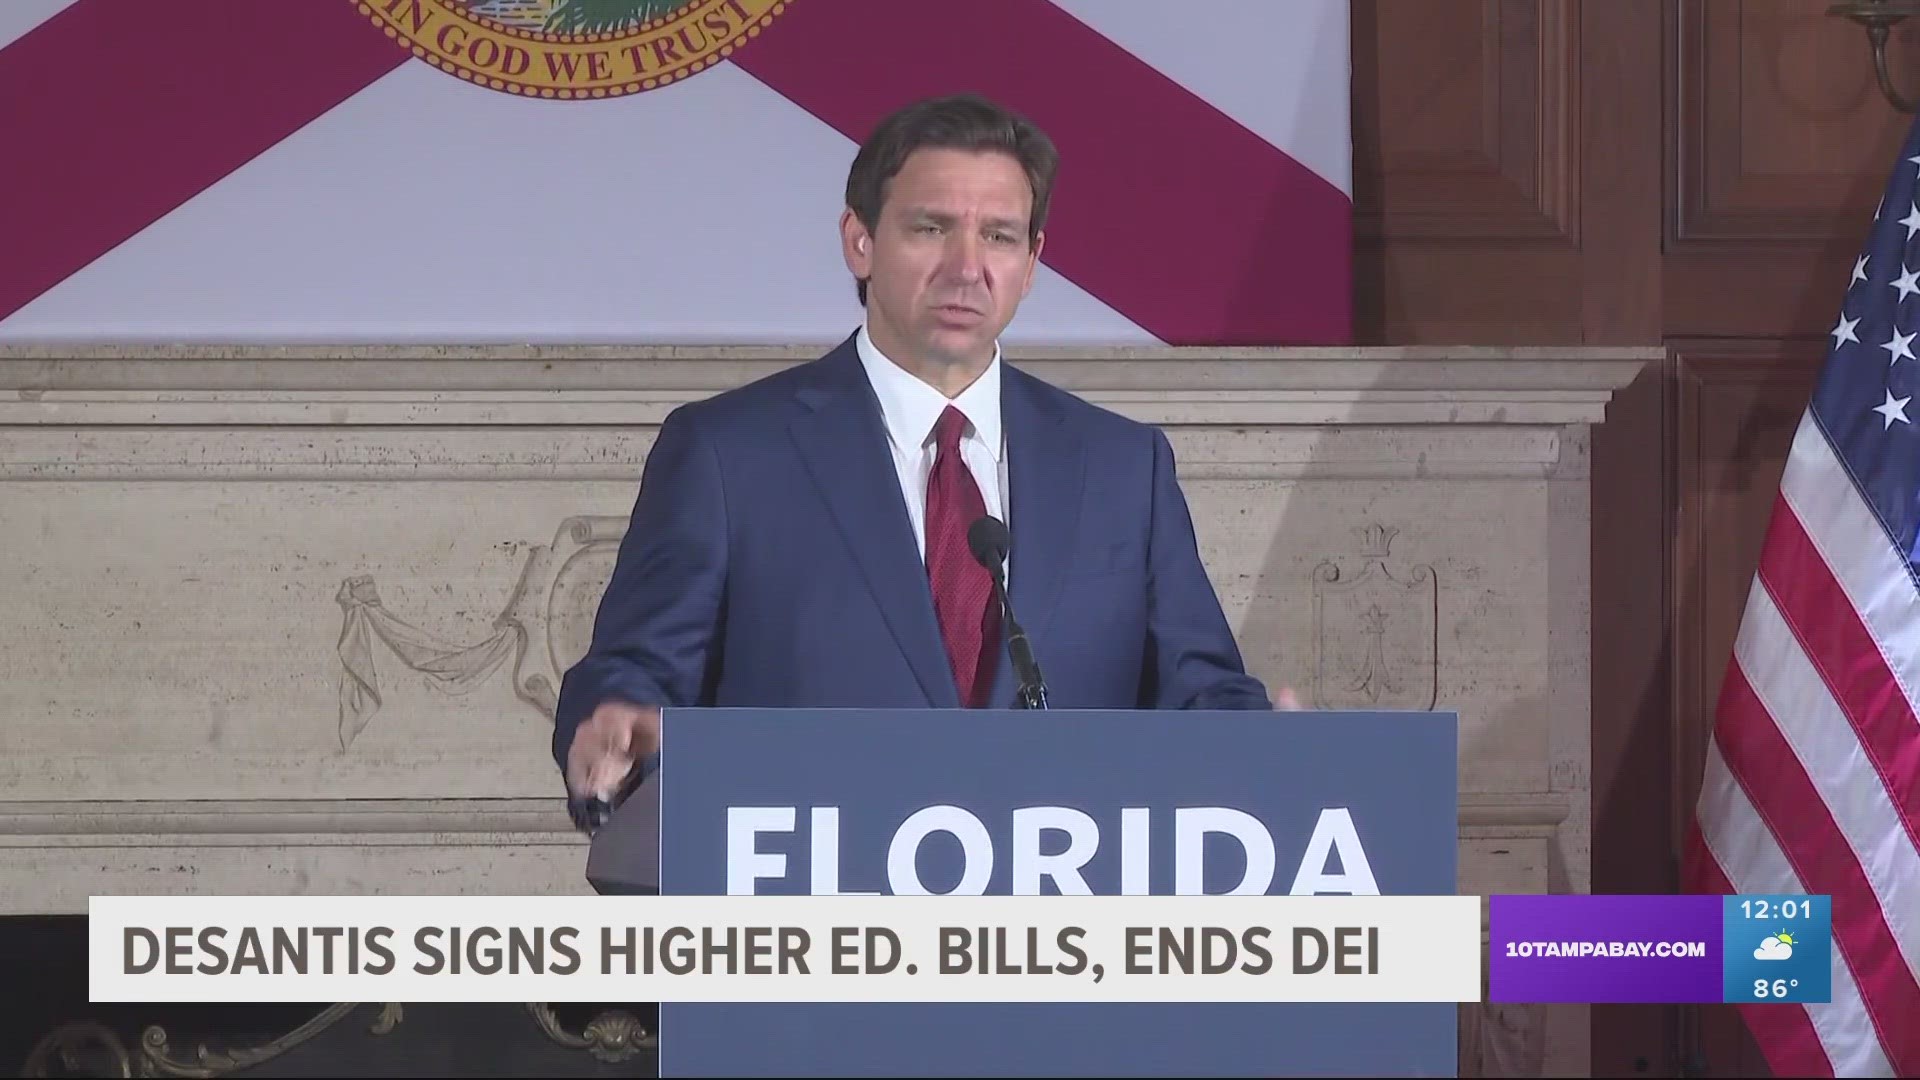 The governor says the bills will maintain Florida's position as the national leader in education.